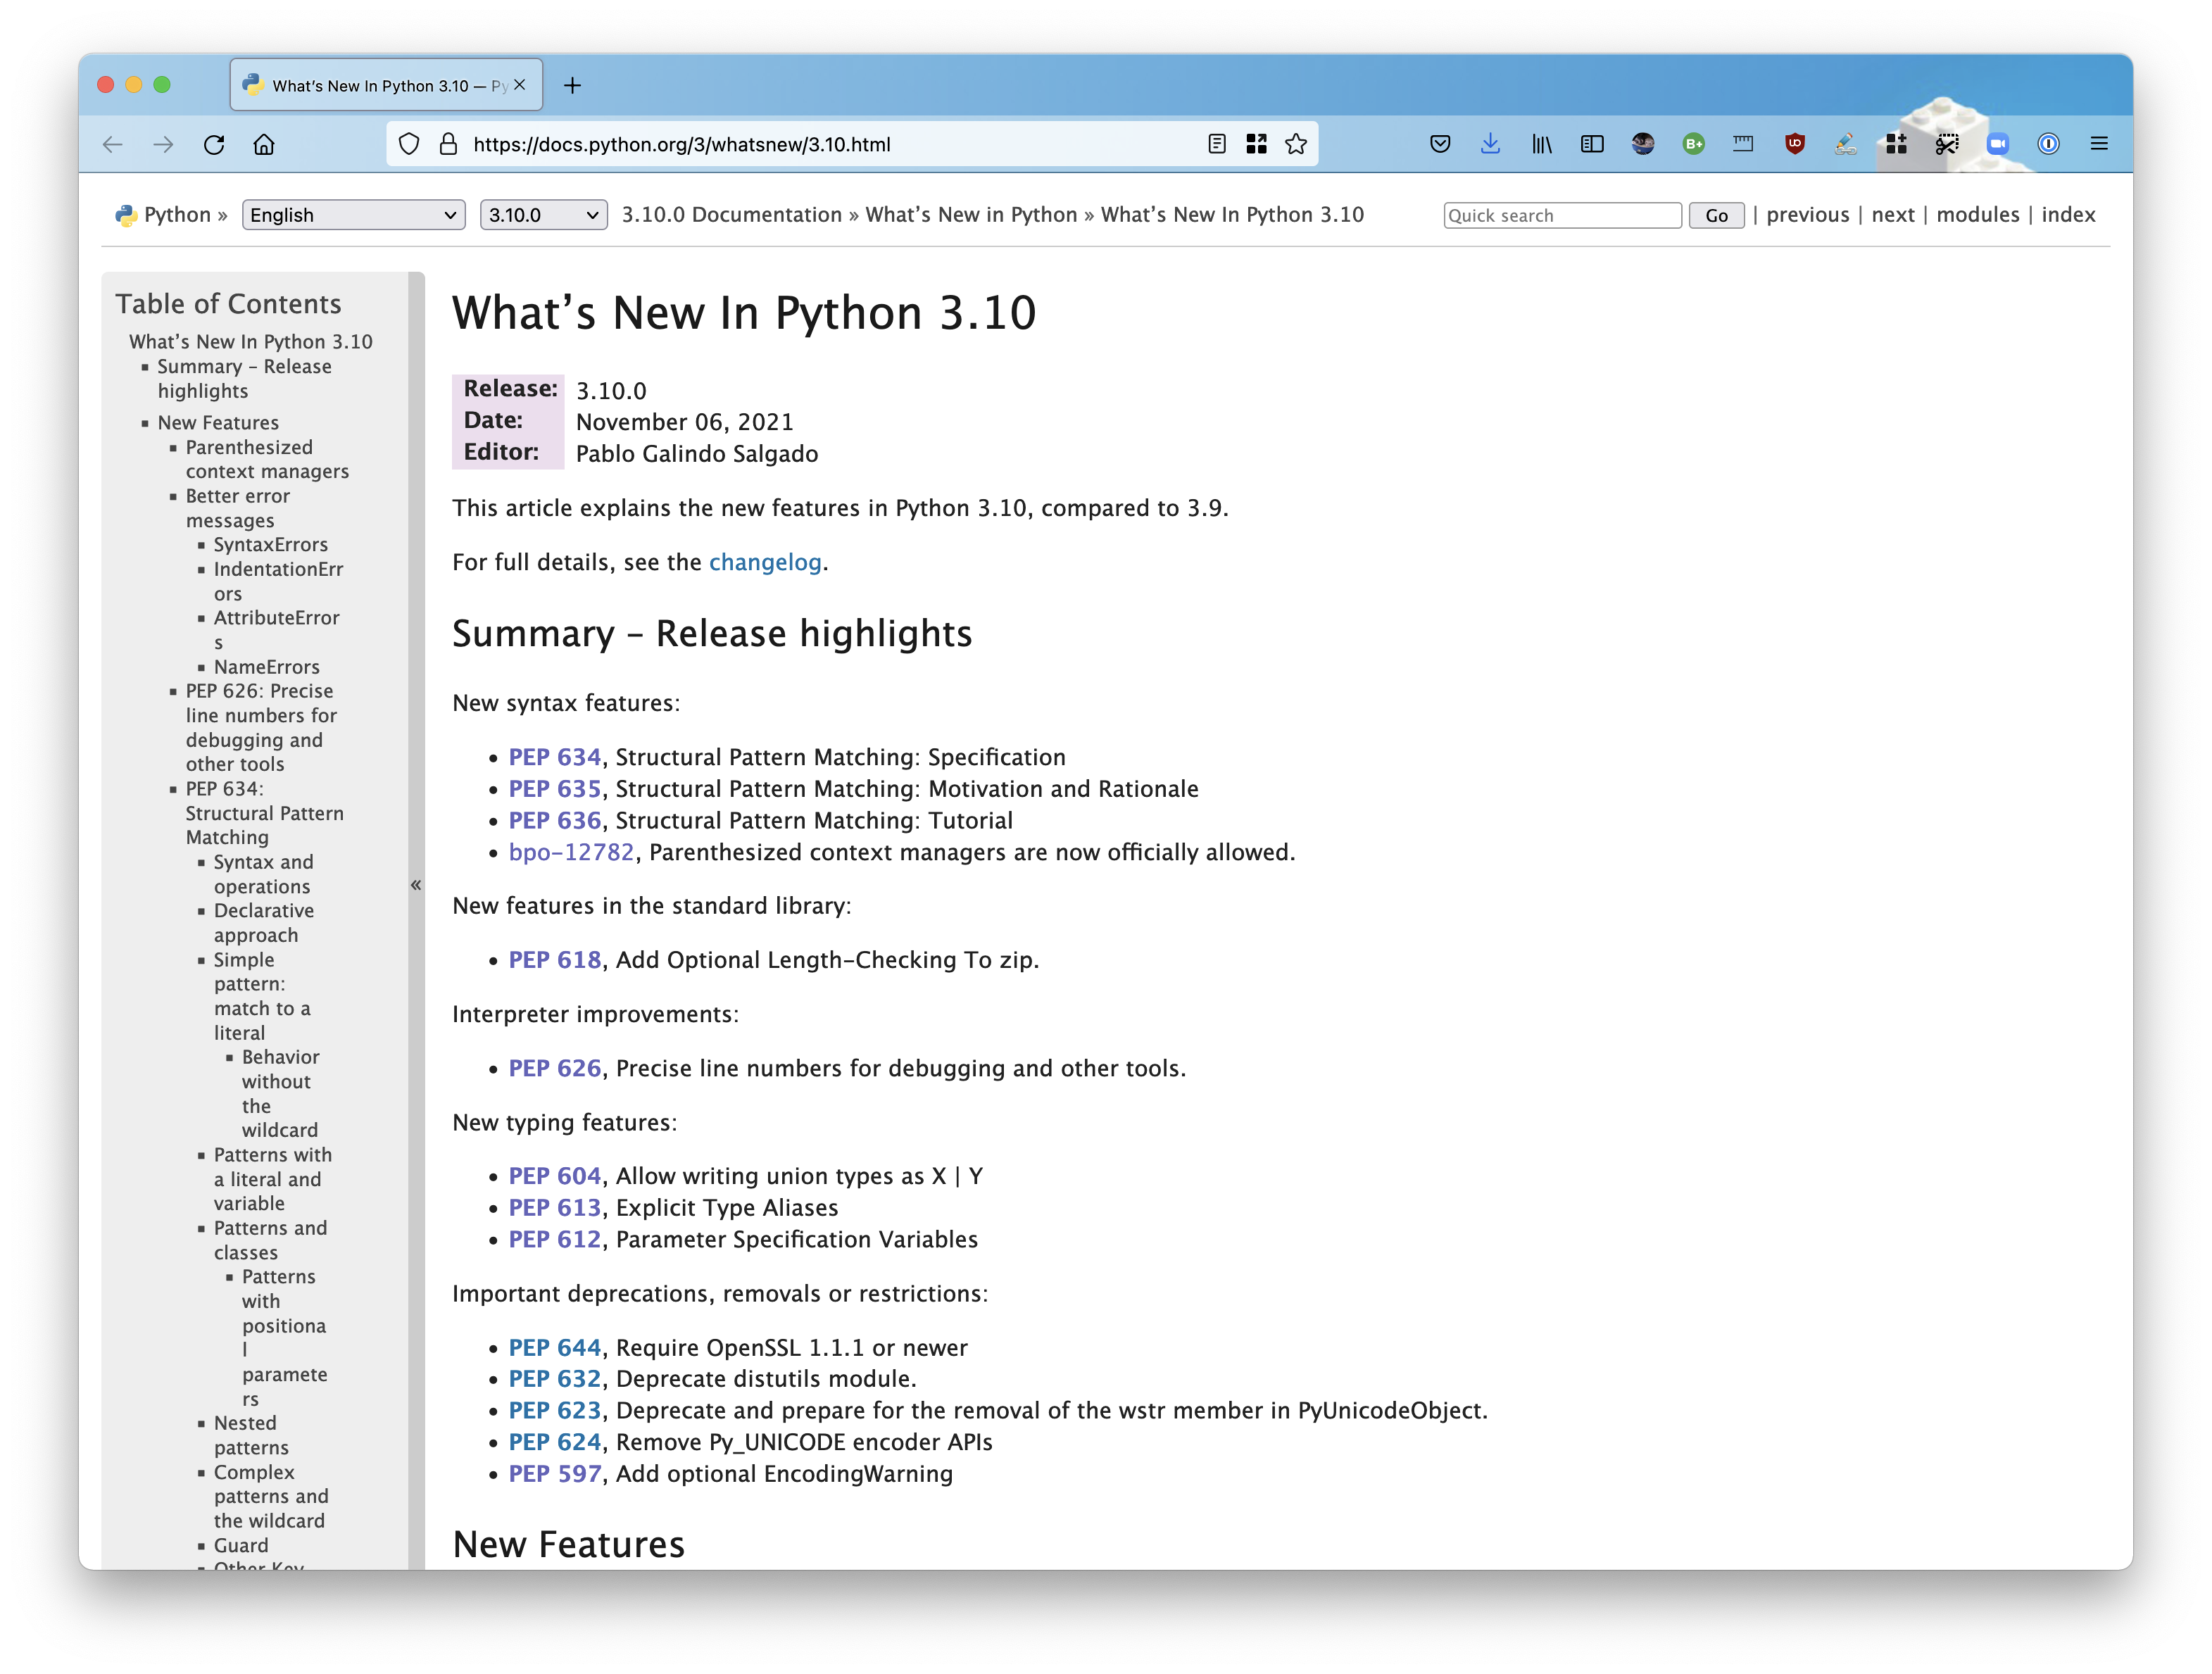 What's New in Python 3.10